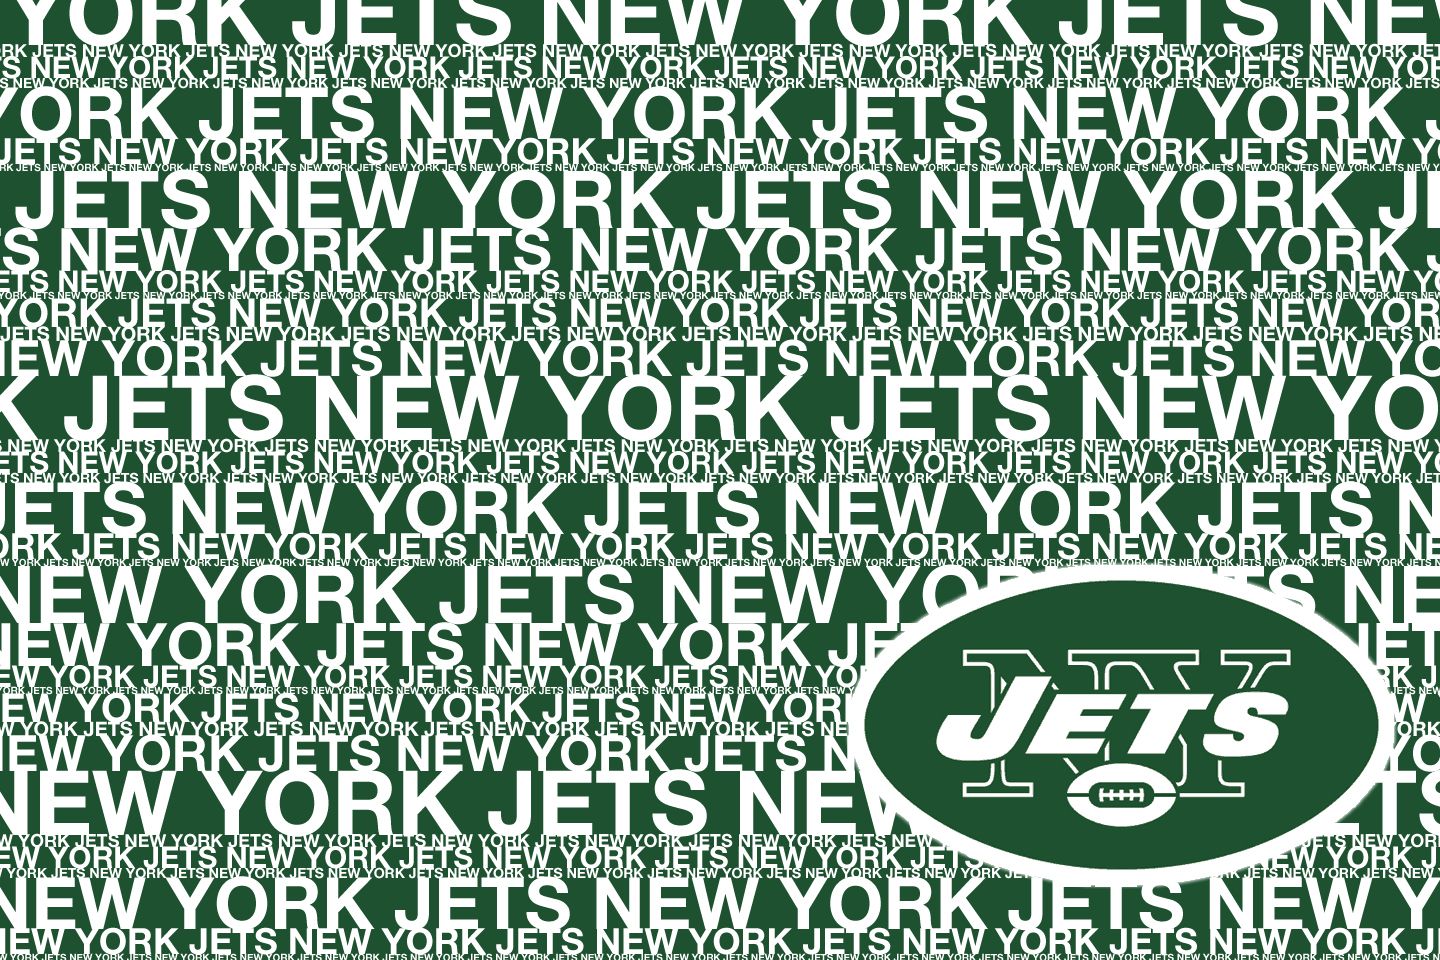 Amazing New York Jets Wallpaper | Full HD Pictures